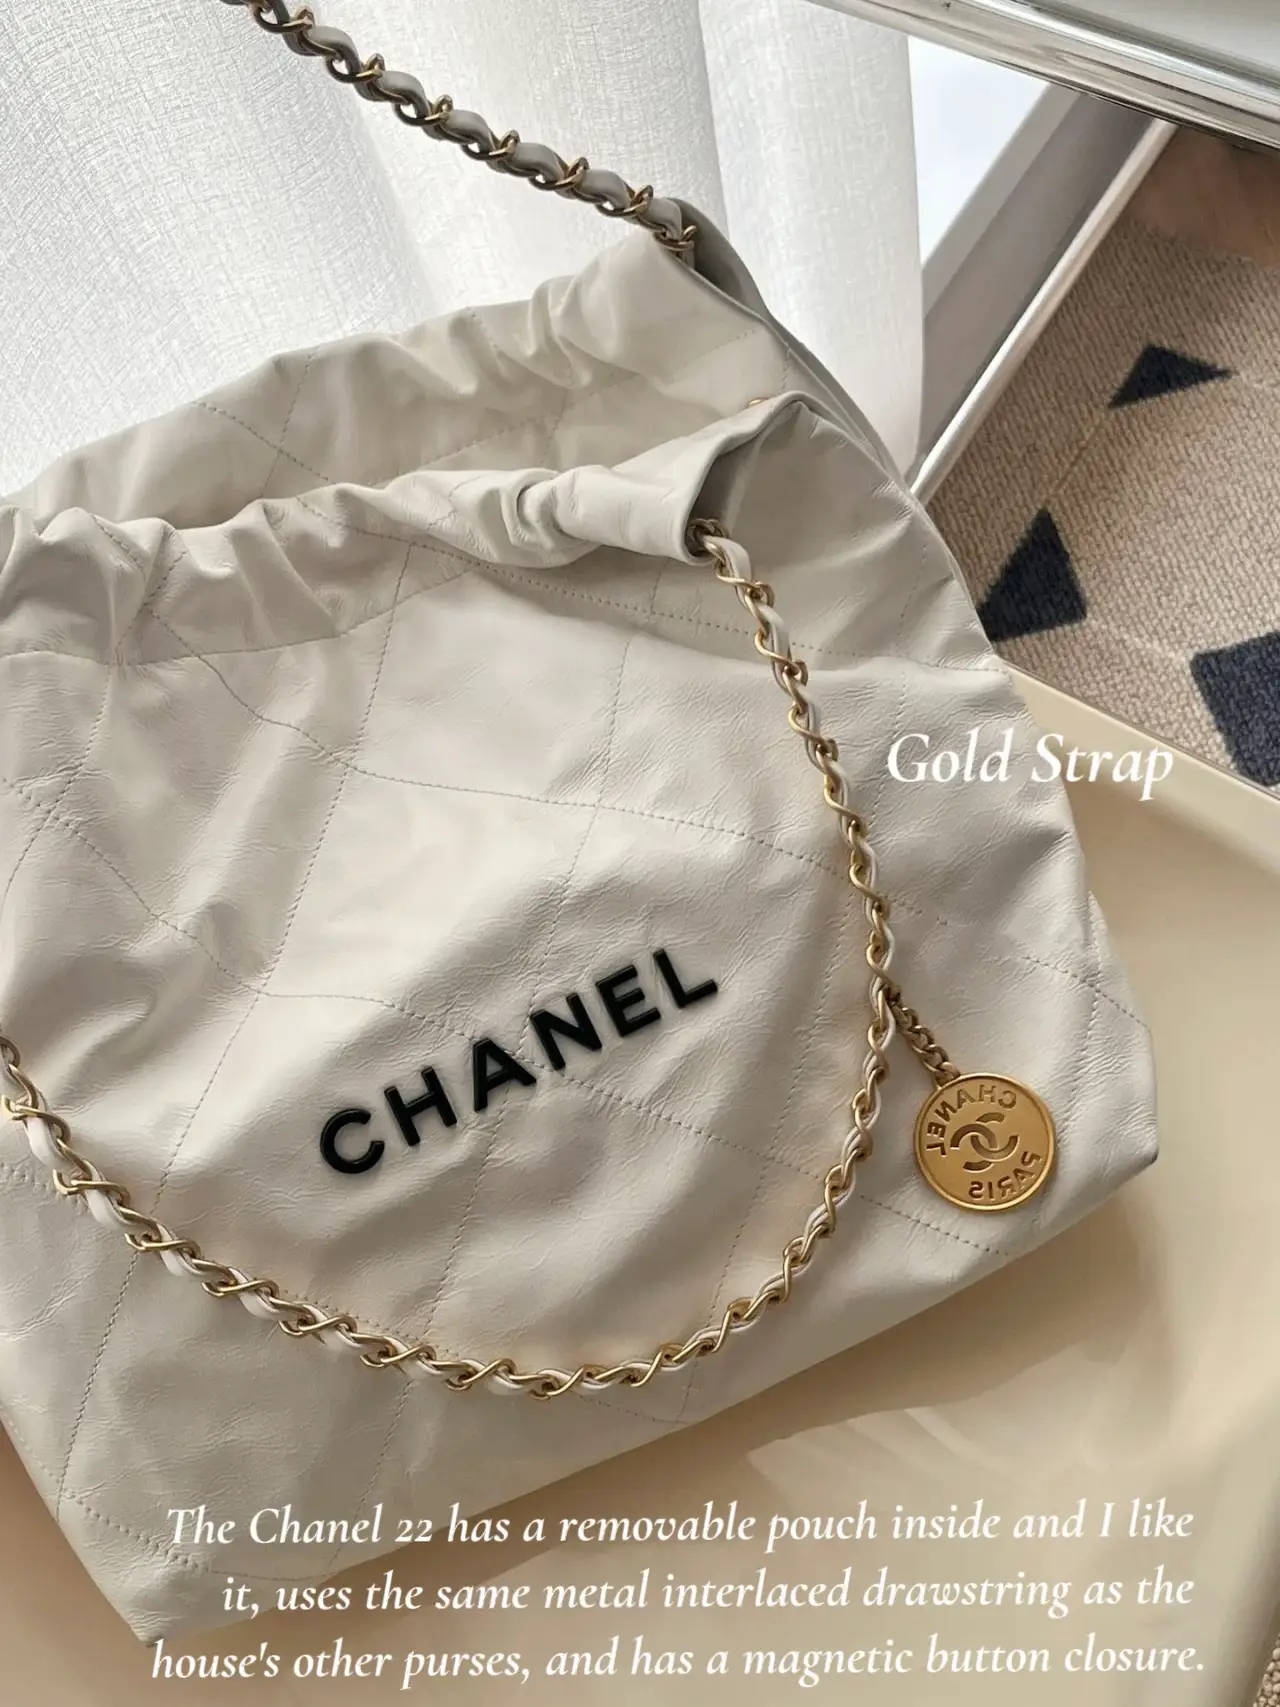 DHGATE CHANEL BAG UNBOXING & REVIEW